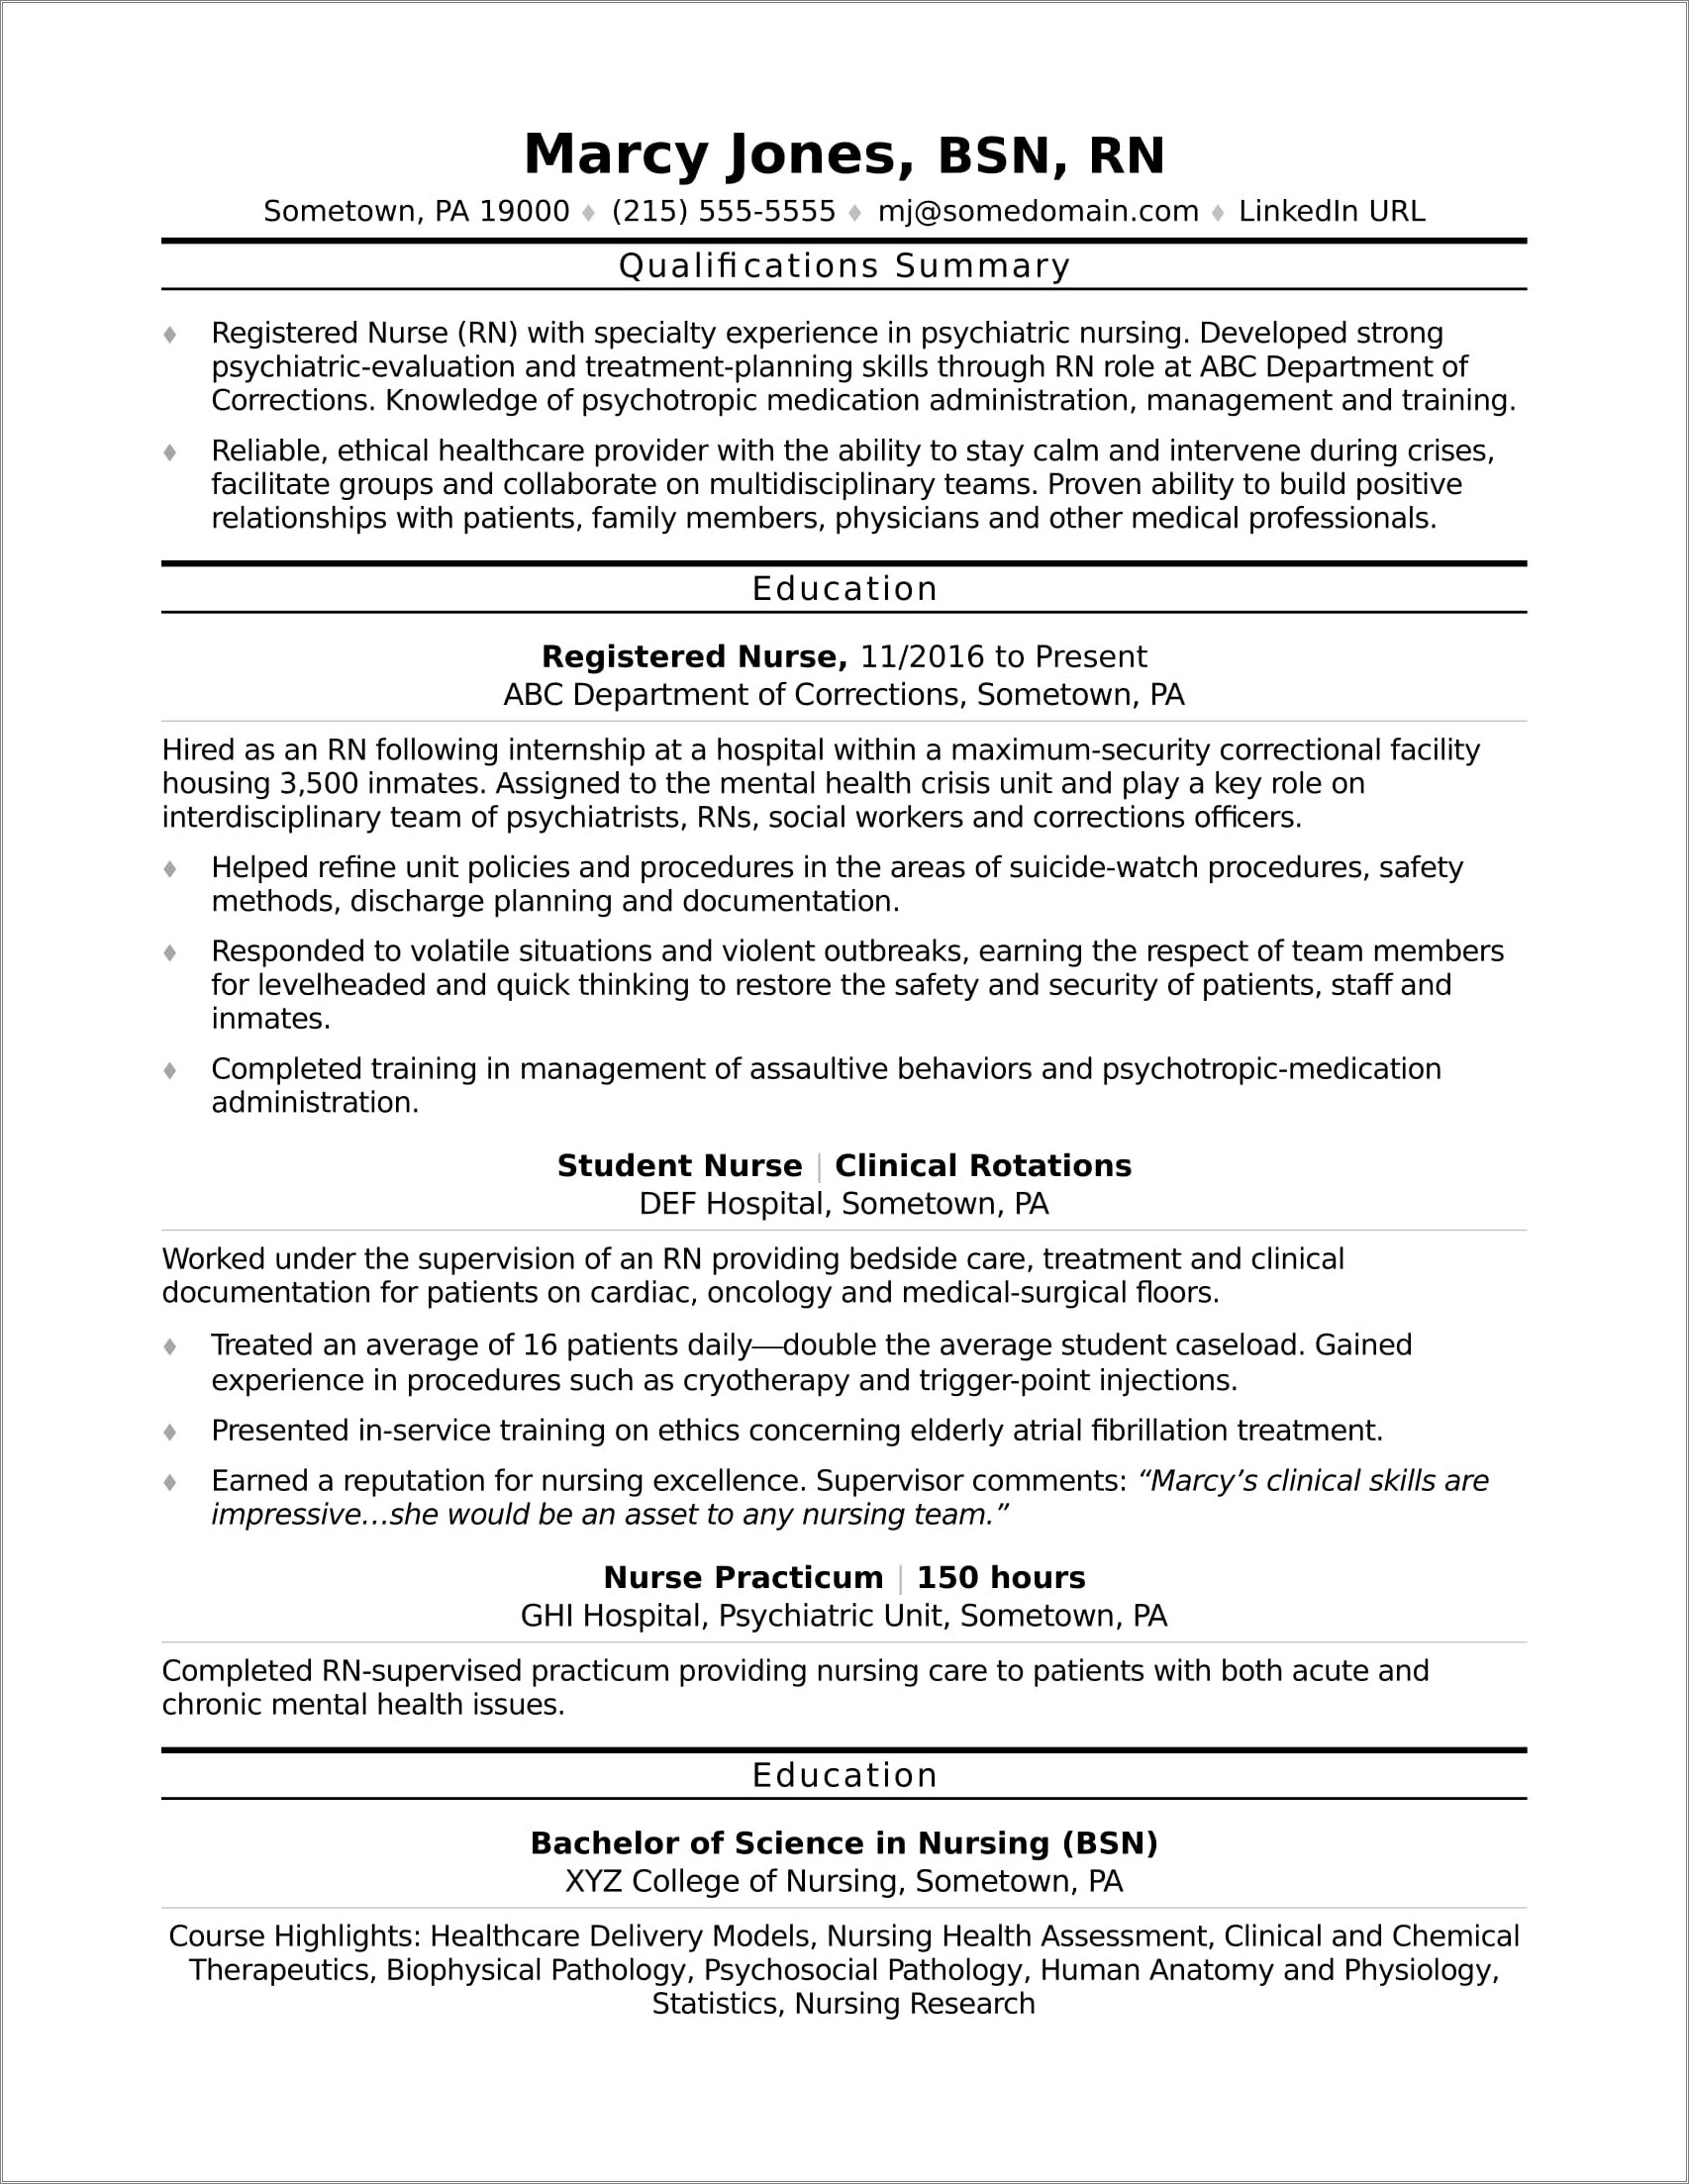 Resume Objective Examples For Nursing Shool